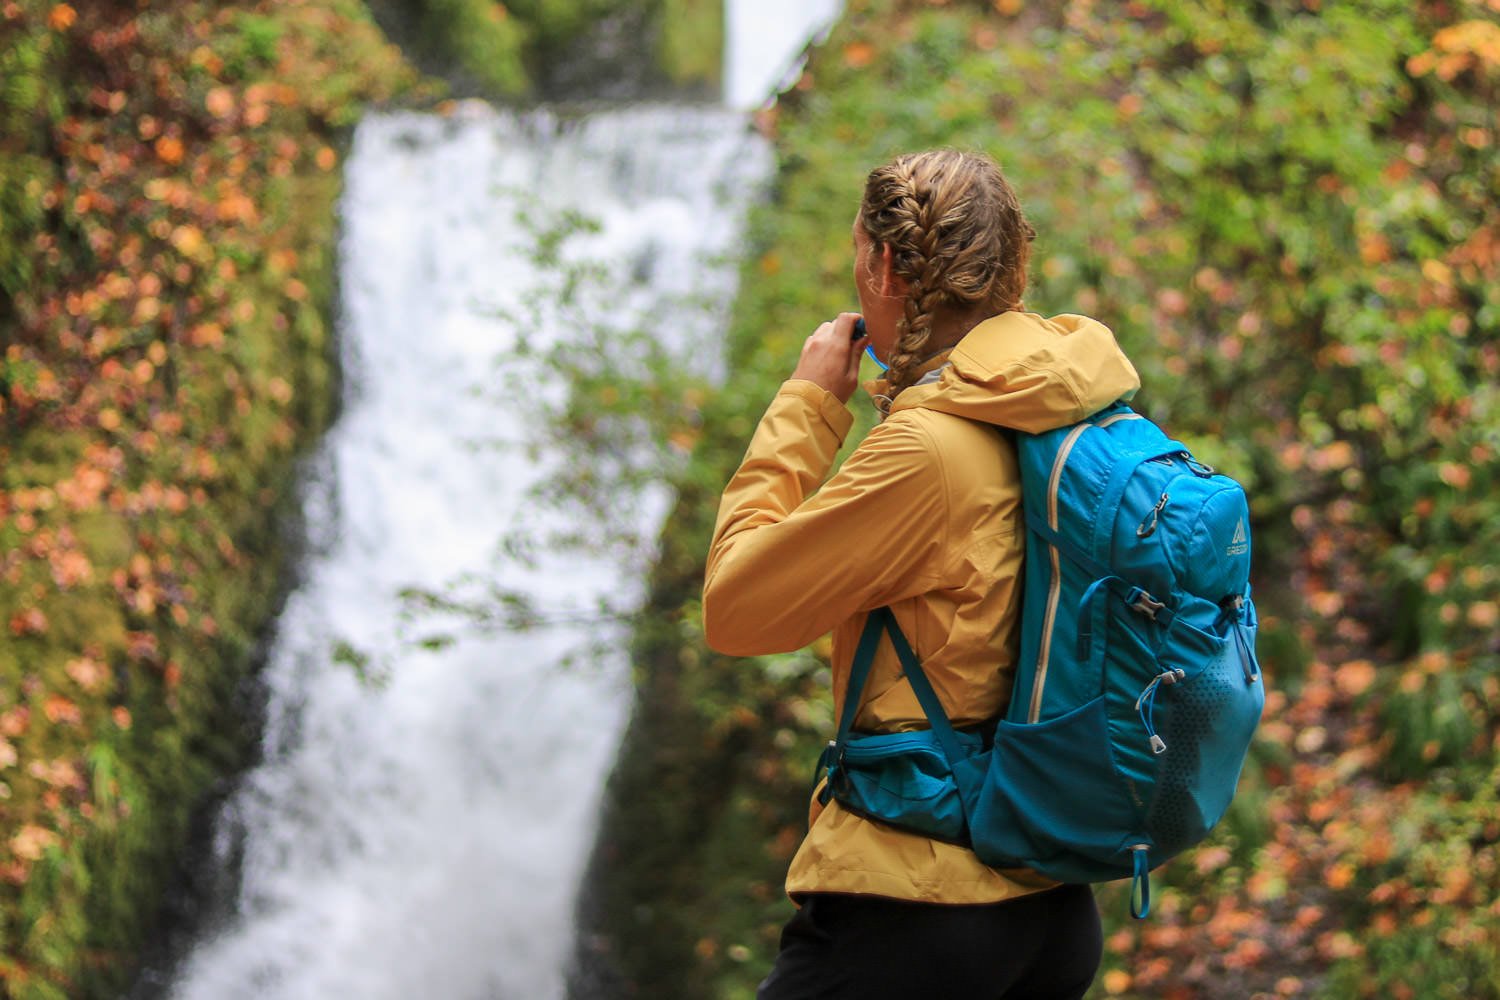 A hiker drinking out of a hydration pack in front of a waterfall